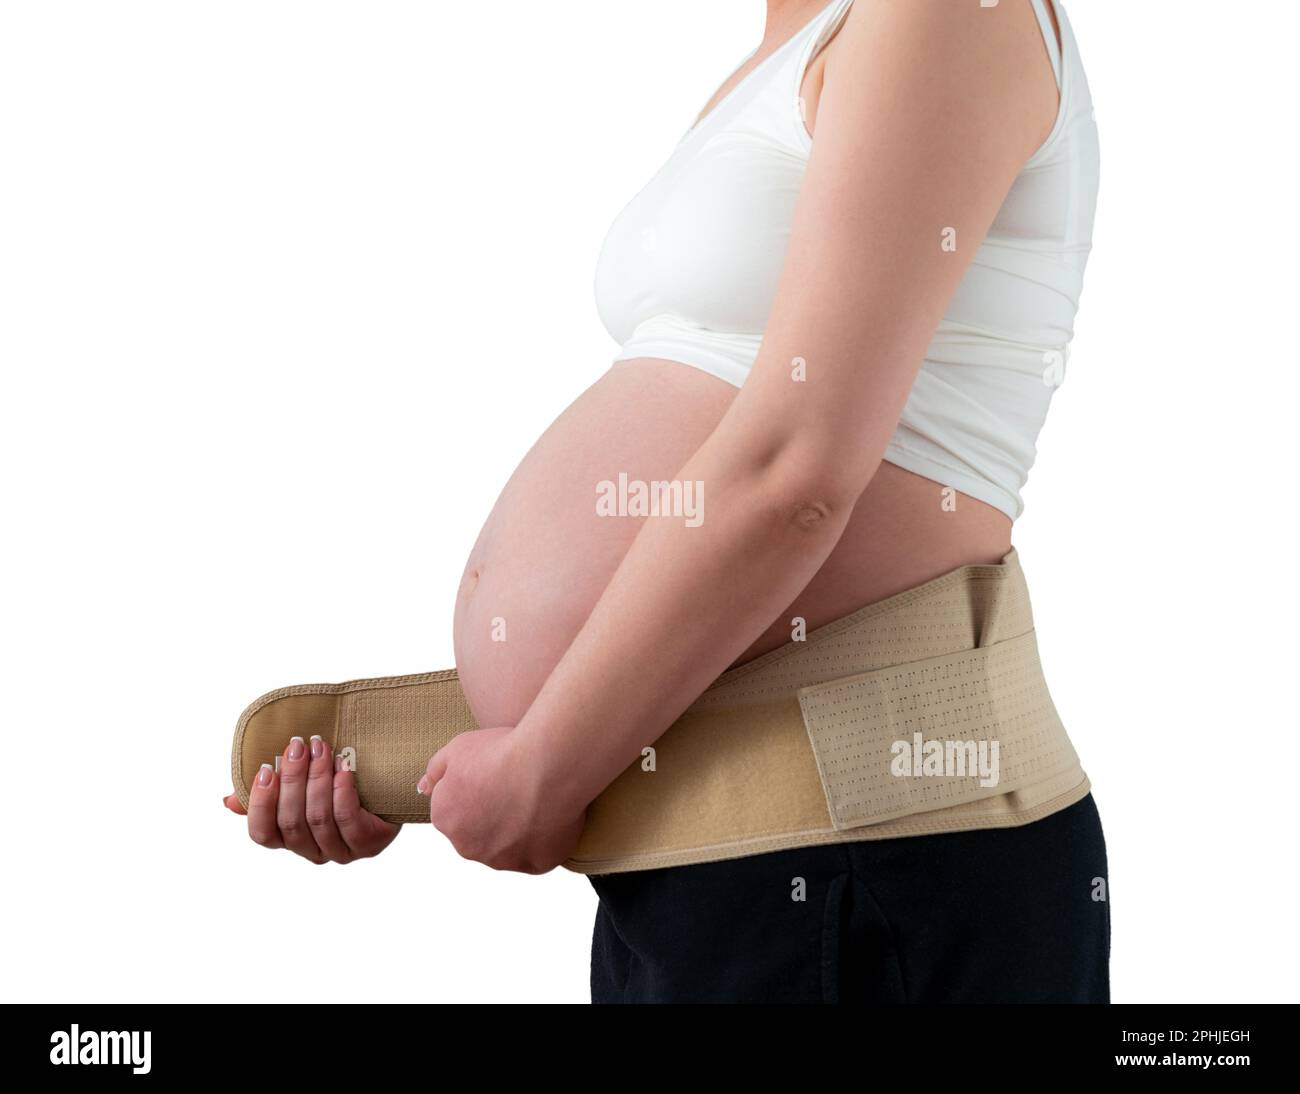 Pregnant woman putting on supporting bandage to reduce backache